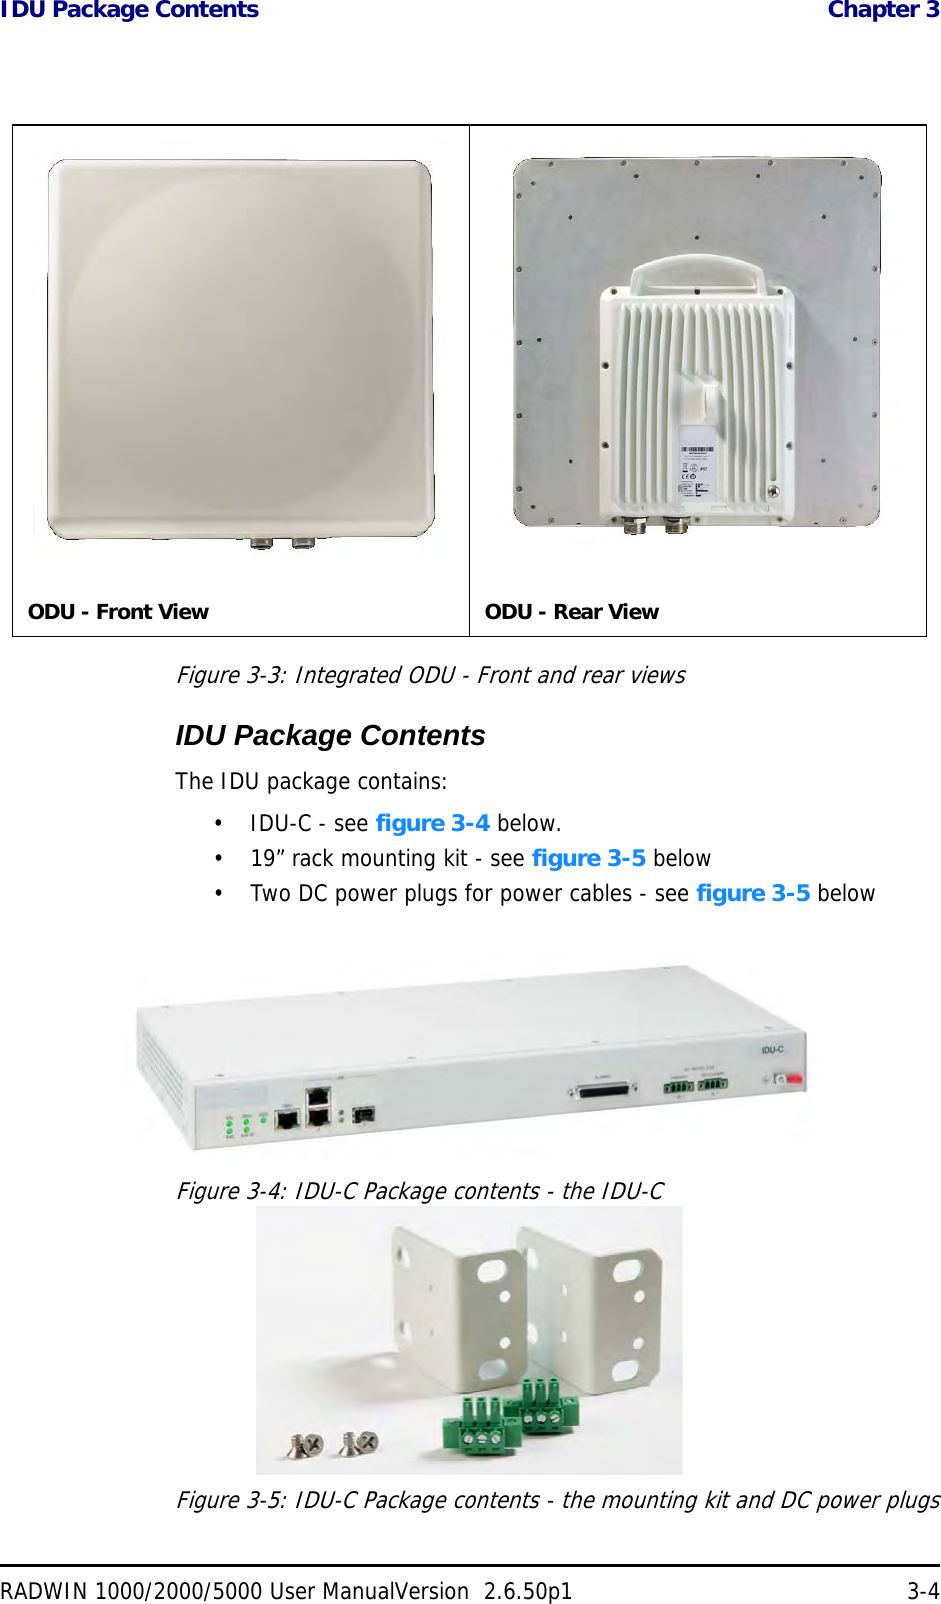 IDU Package Contents  Chapter 3RADWIN 1000/2000/5000 User ManualVersion  2.6.50p1 3-4Figure 3-3: Integrated ODU - Front and rear viewsIDU Package ContentsThe IDU package contains:• IDU-C - see figure 3-4 below.• 19” rack mounting kit - see figure 3-5 below• Two DC power plugs for power cables - see figure 3-5 belowFigure 3-4: IDU-C Package contents - the IDU-CFigure 3-5: IDU-C Package contents - the mounting kit and DC power plugsODU - Front View ODU - Rear View